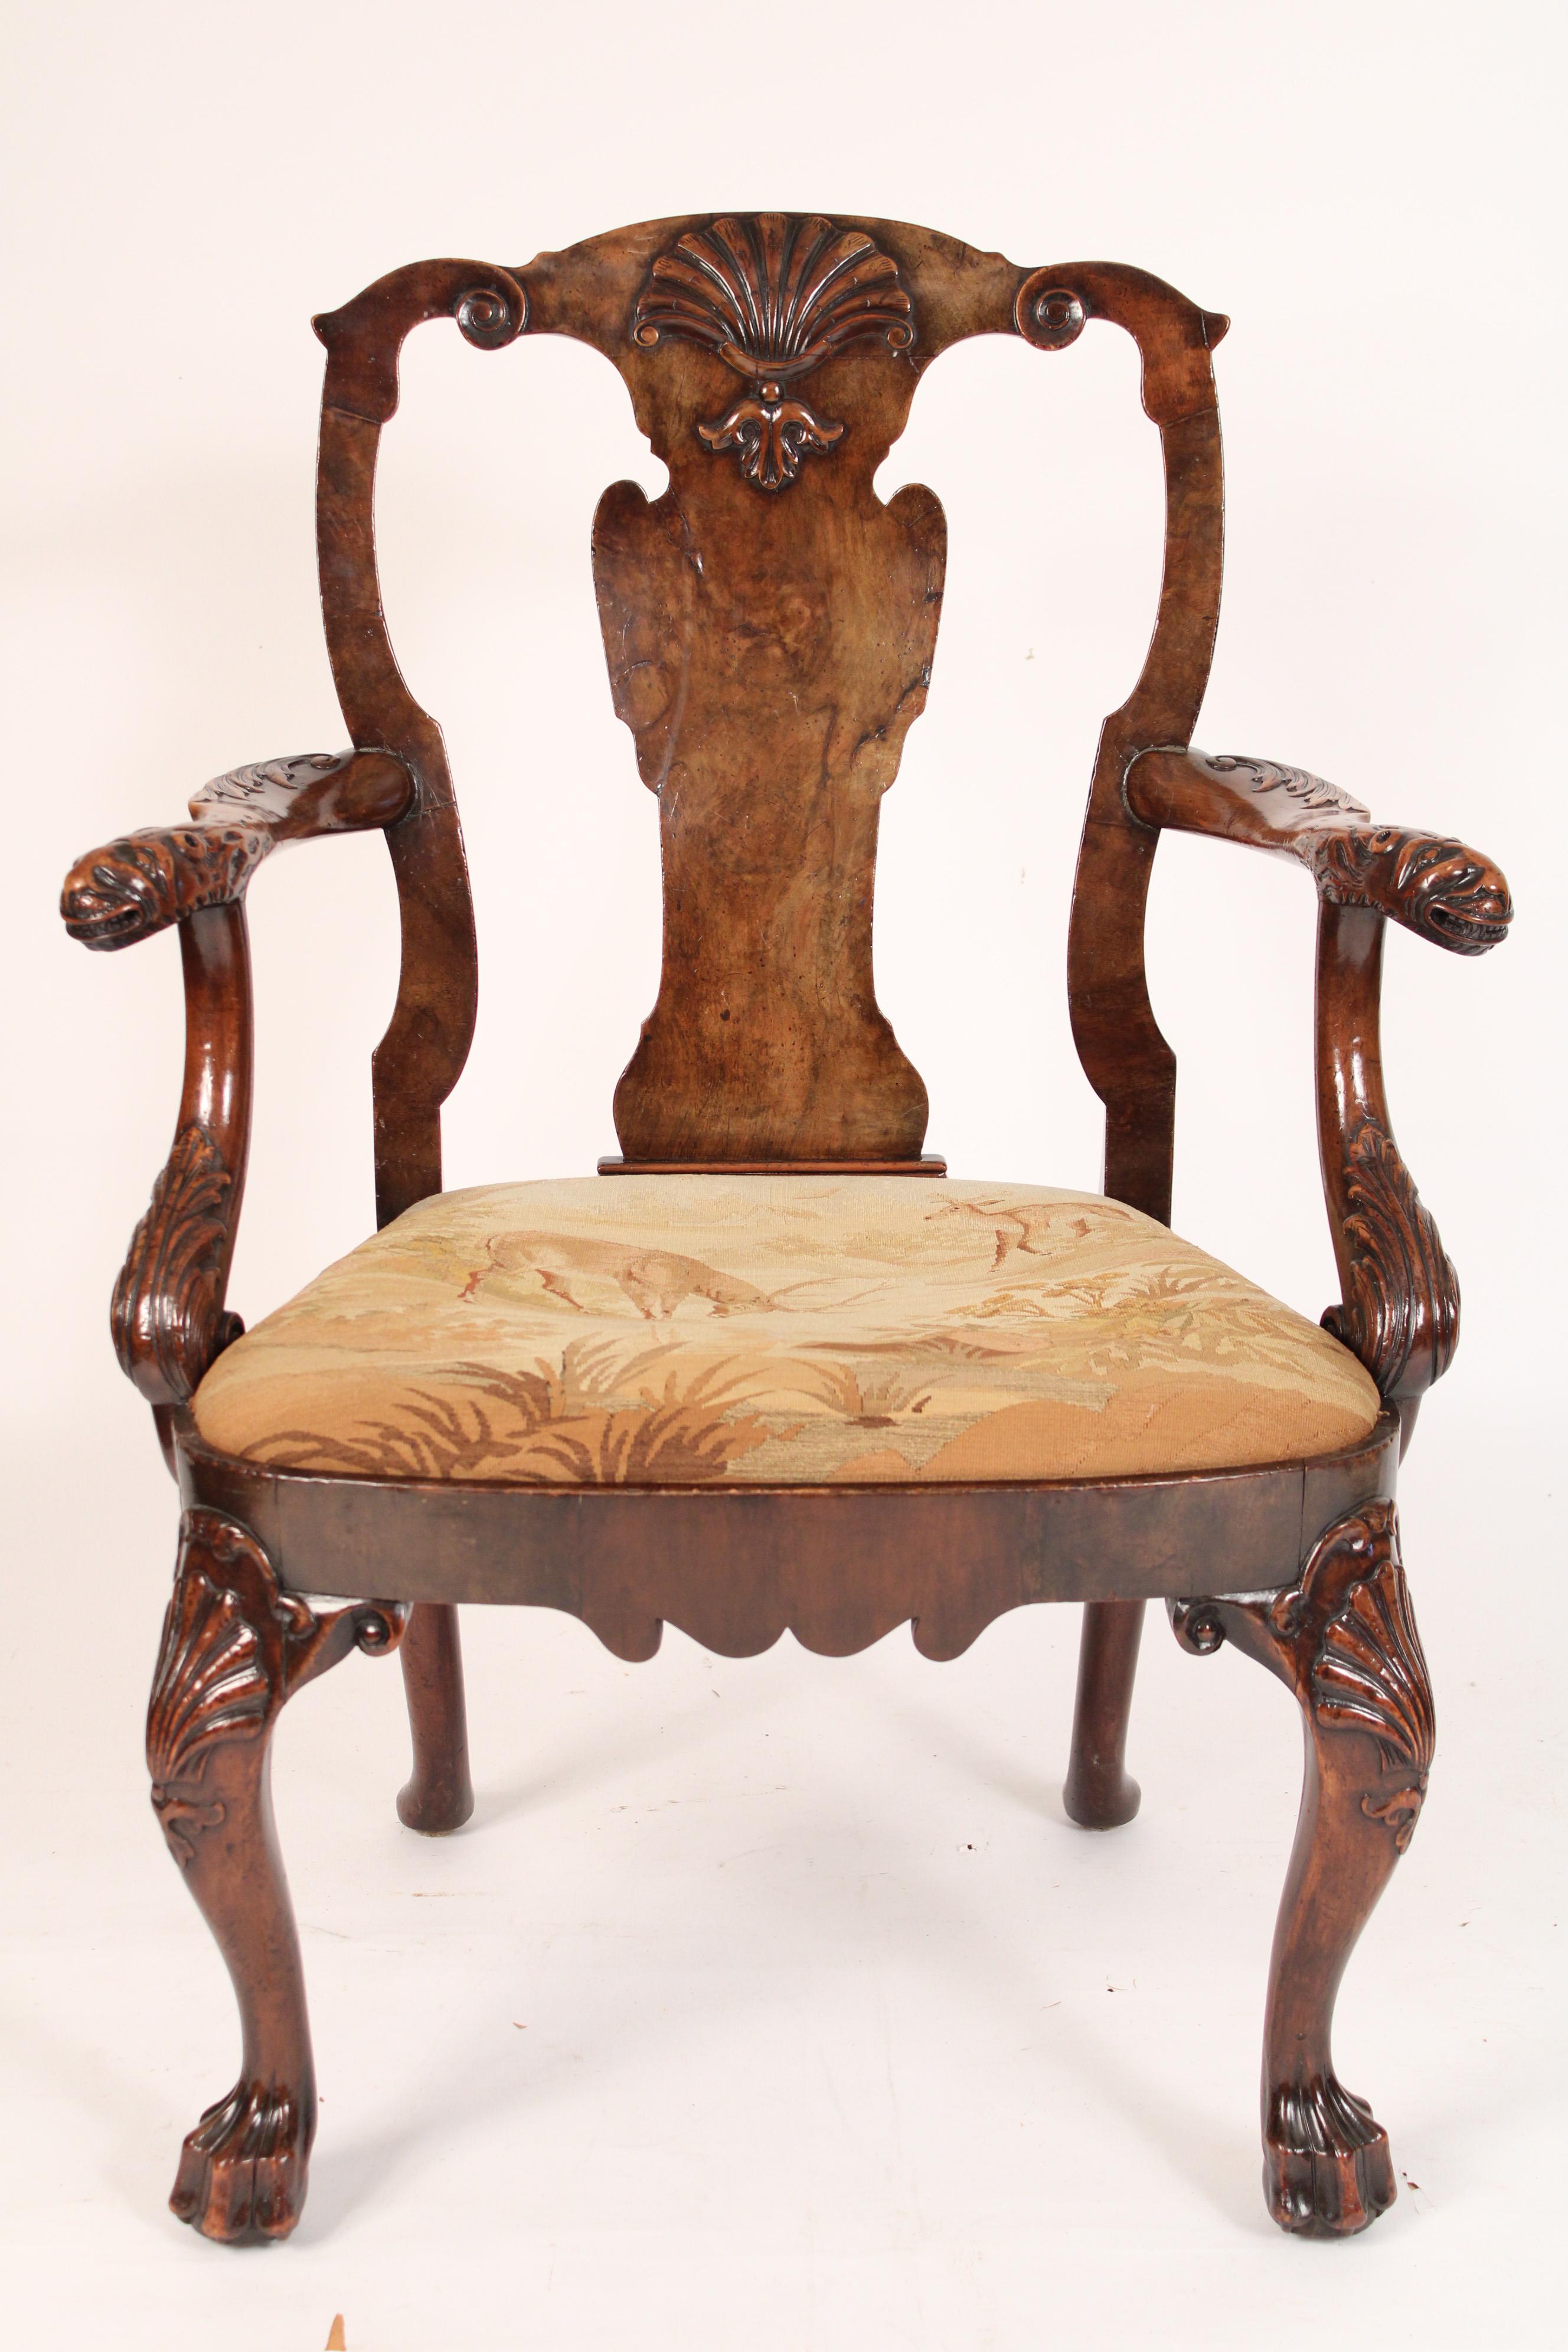 Antique George II style carved walnut armchair, 18th century and later. With a cupids bow crest rail with central shell carving, burl walnut vase shaped back splat, arms terminating in mythological animal heads, cabriole legs with shell carved knees